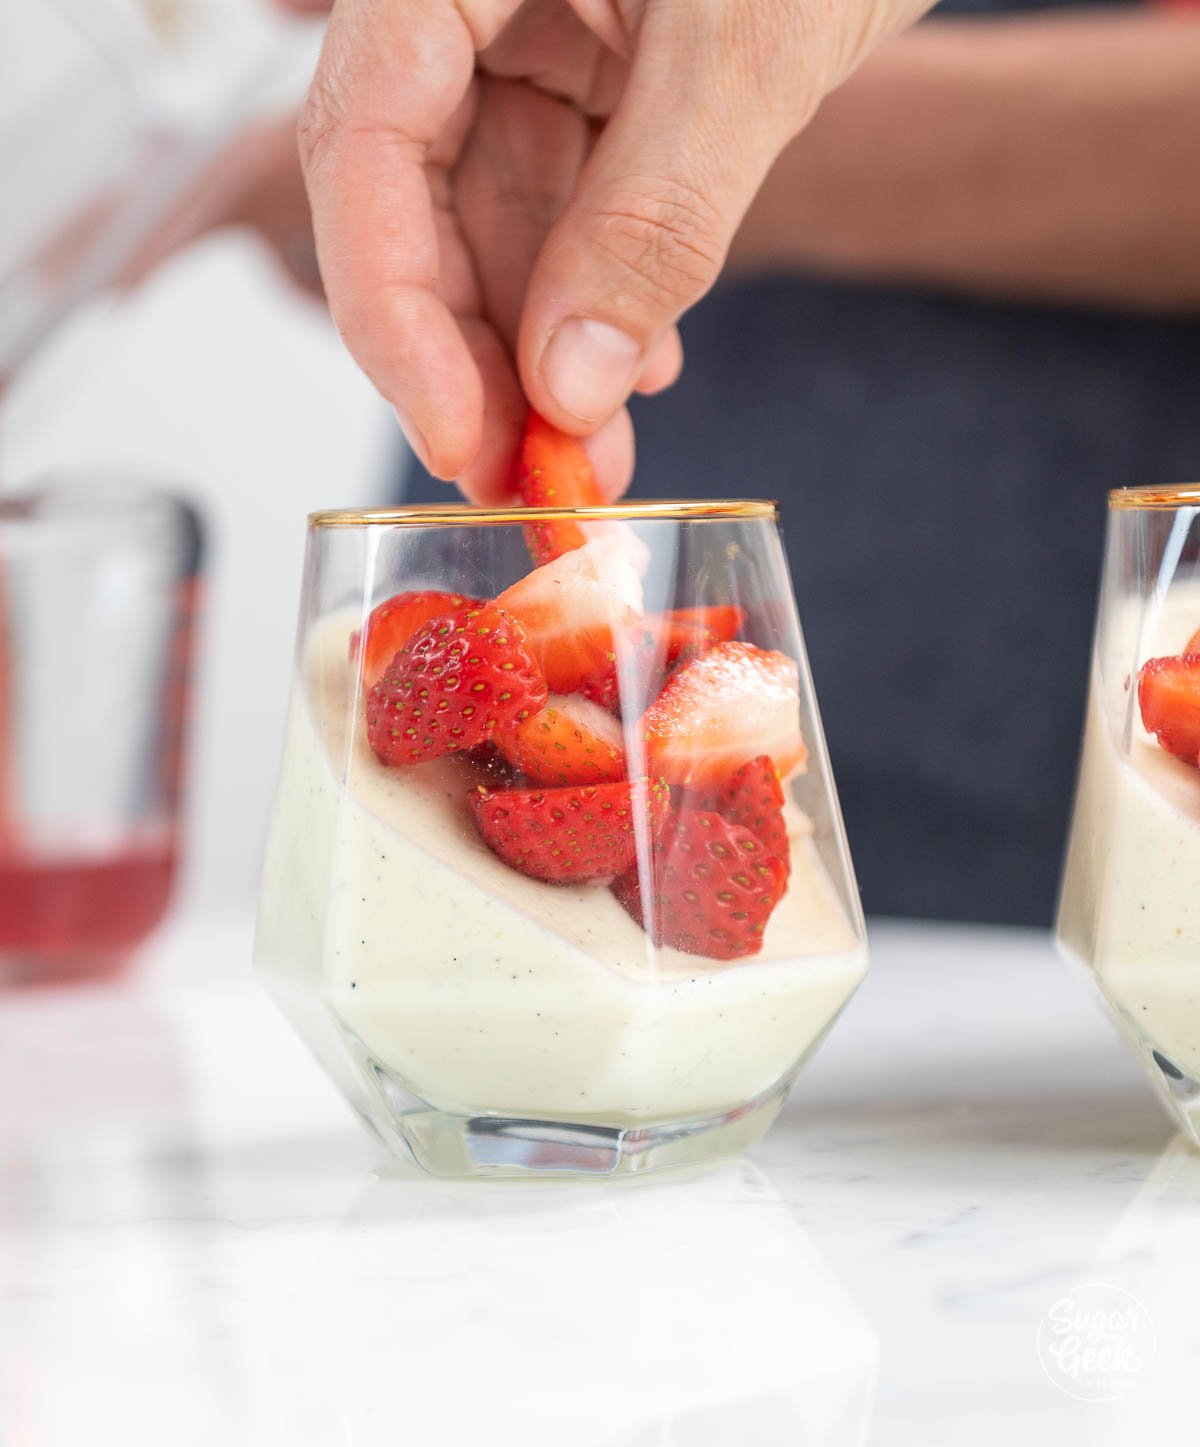 hand shown dropping strawberry pieces into wine glass filled with panna cotta